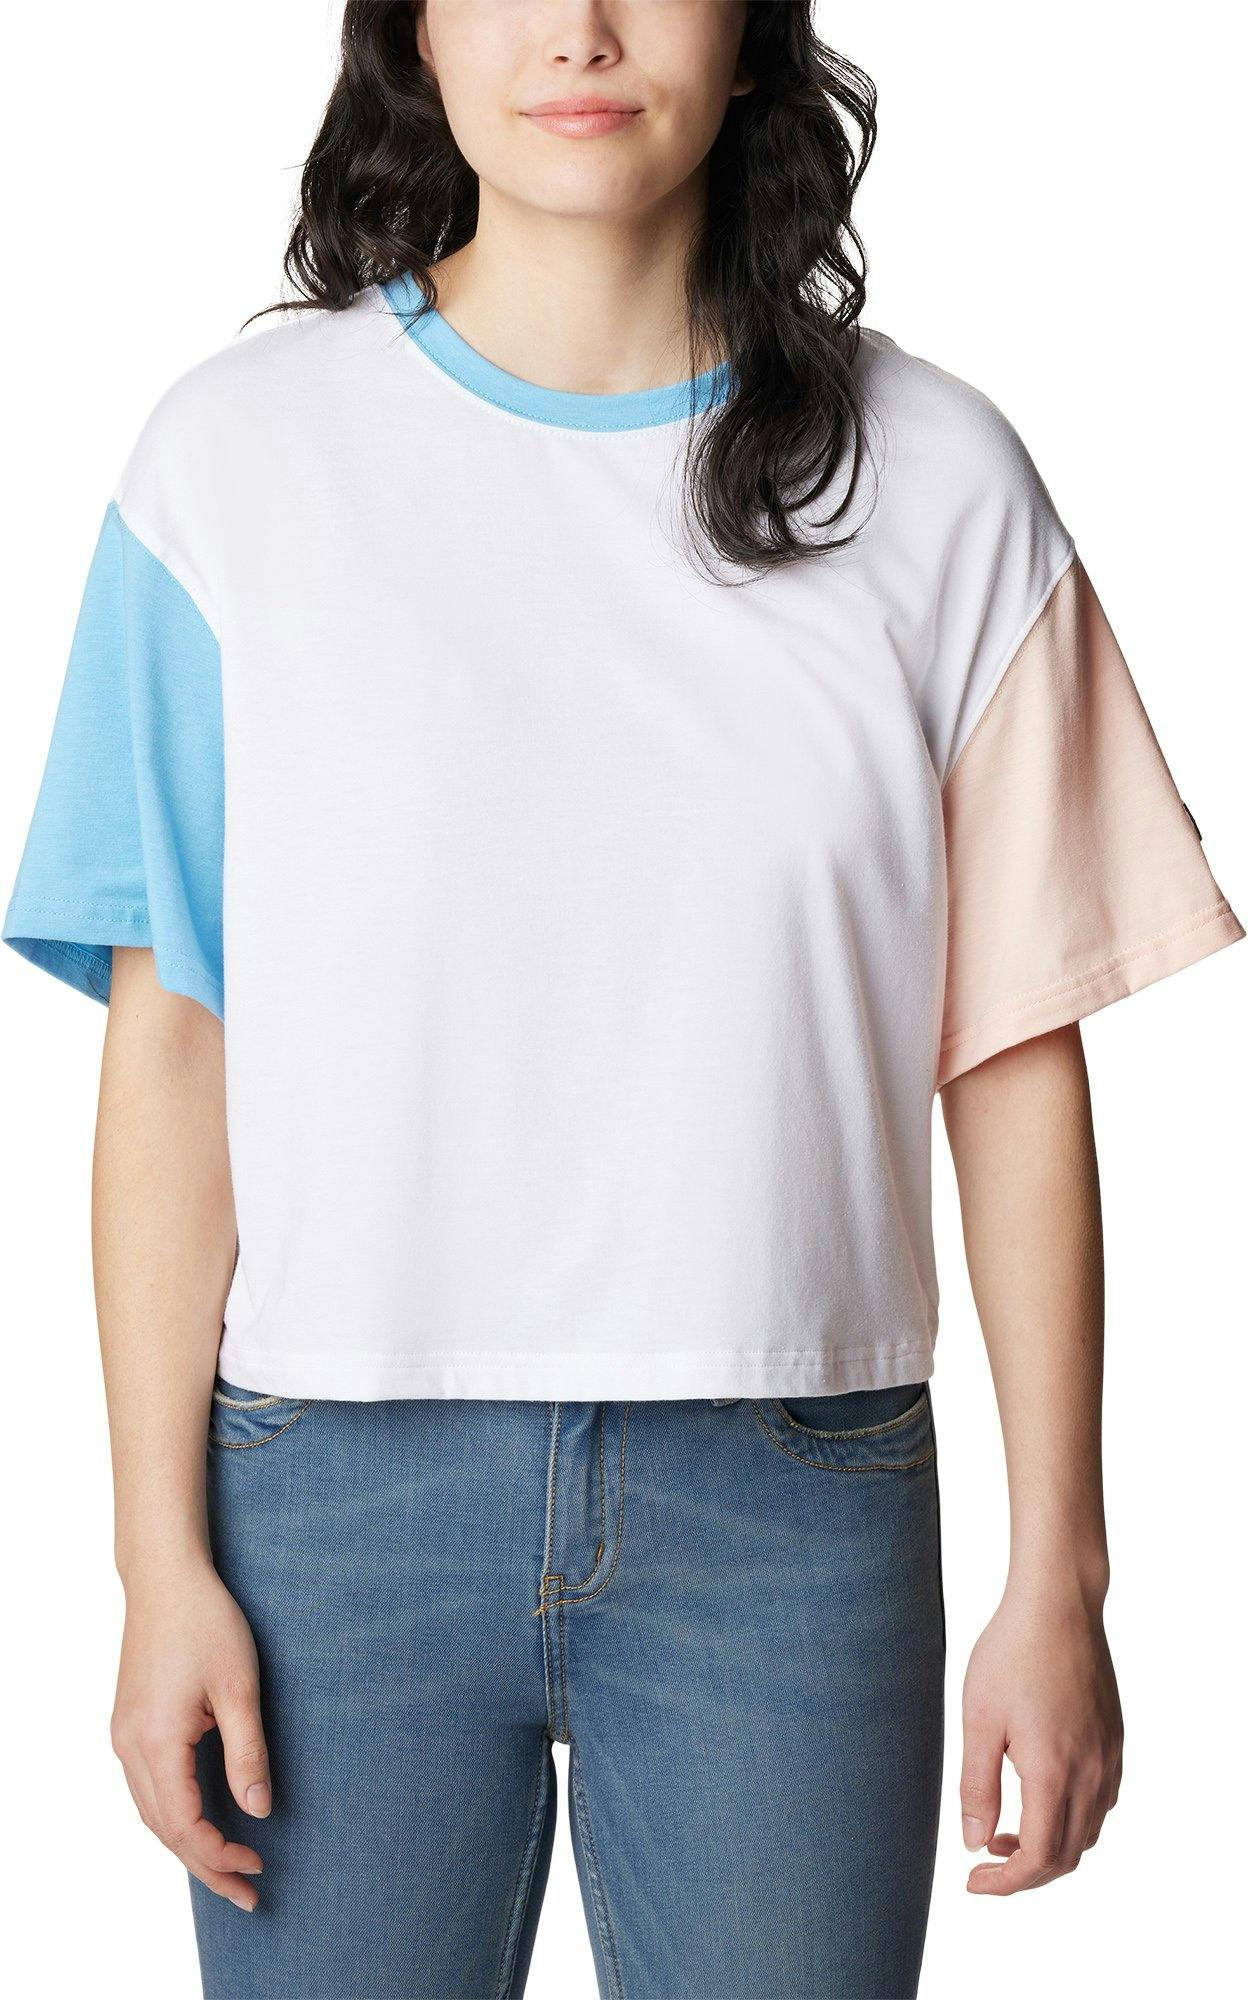 Product image for Deschutes Valley Cropped Short sleeve Tee - Women's